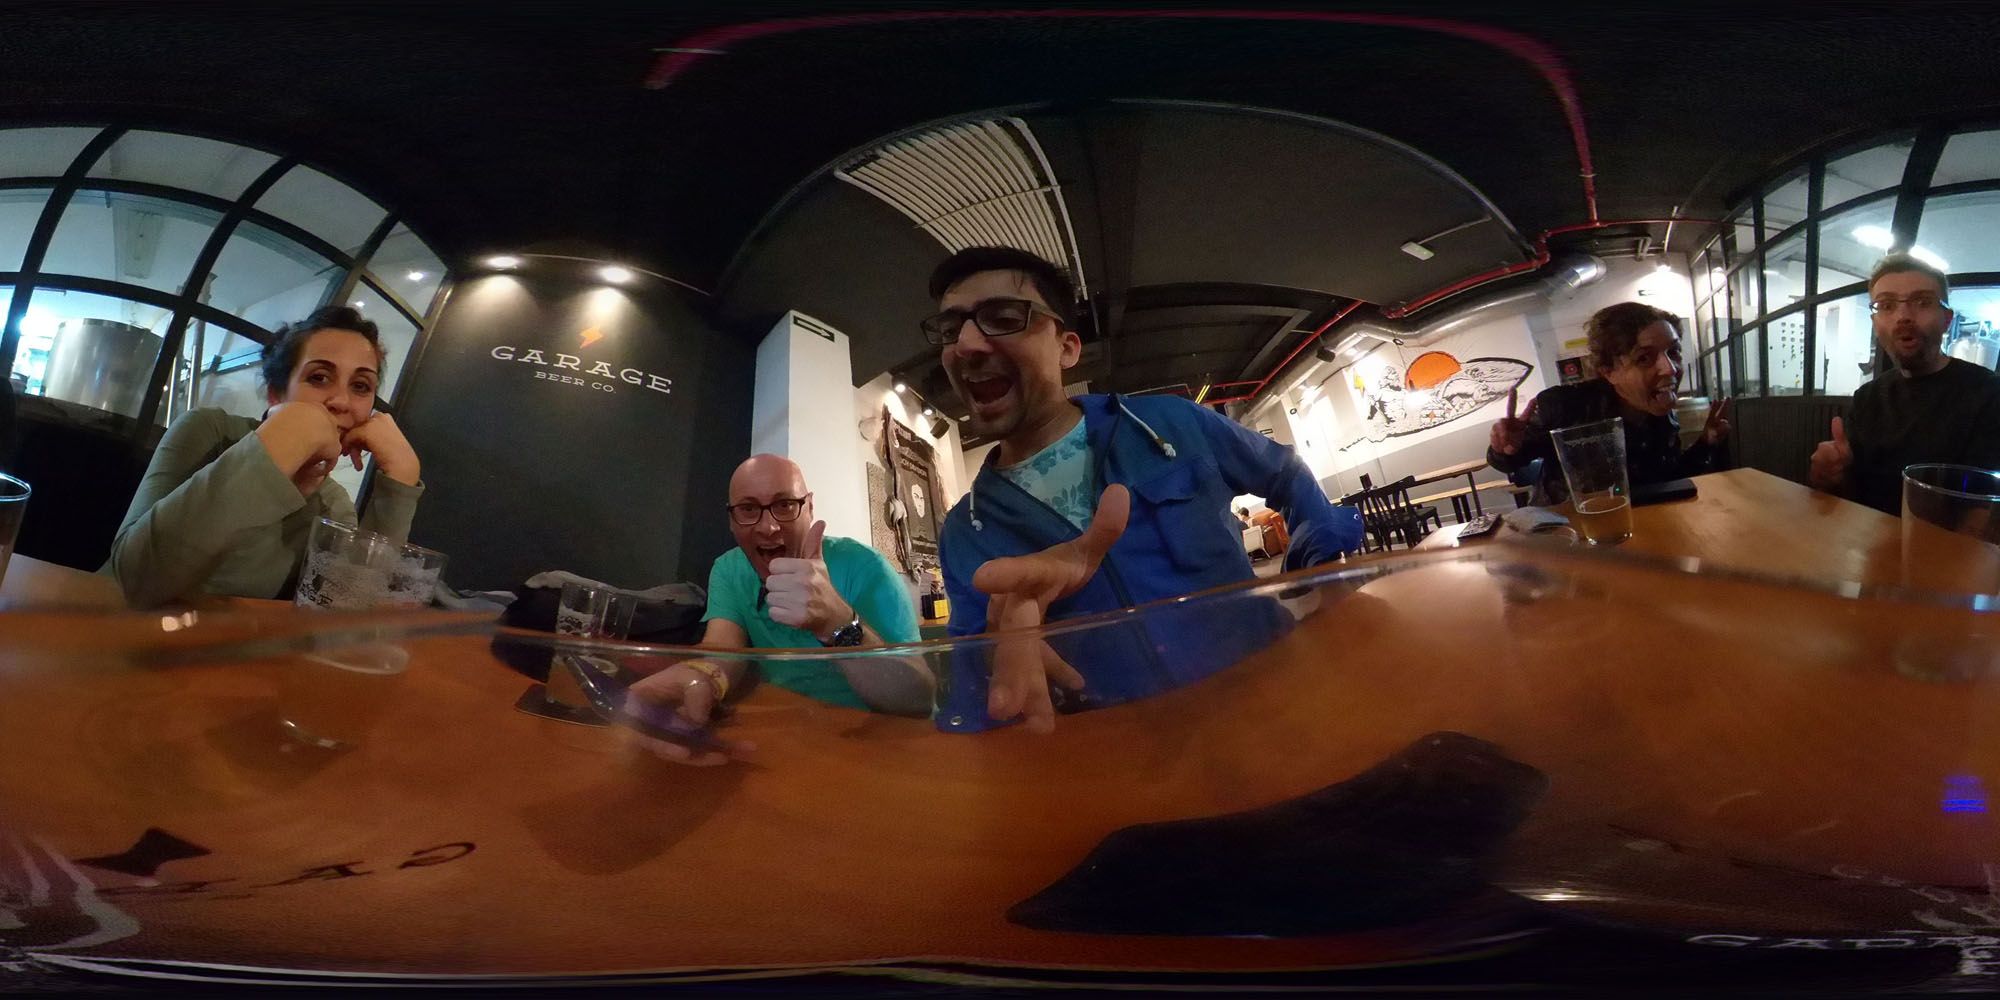 360 from a beer glass. Group photo